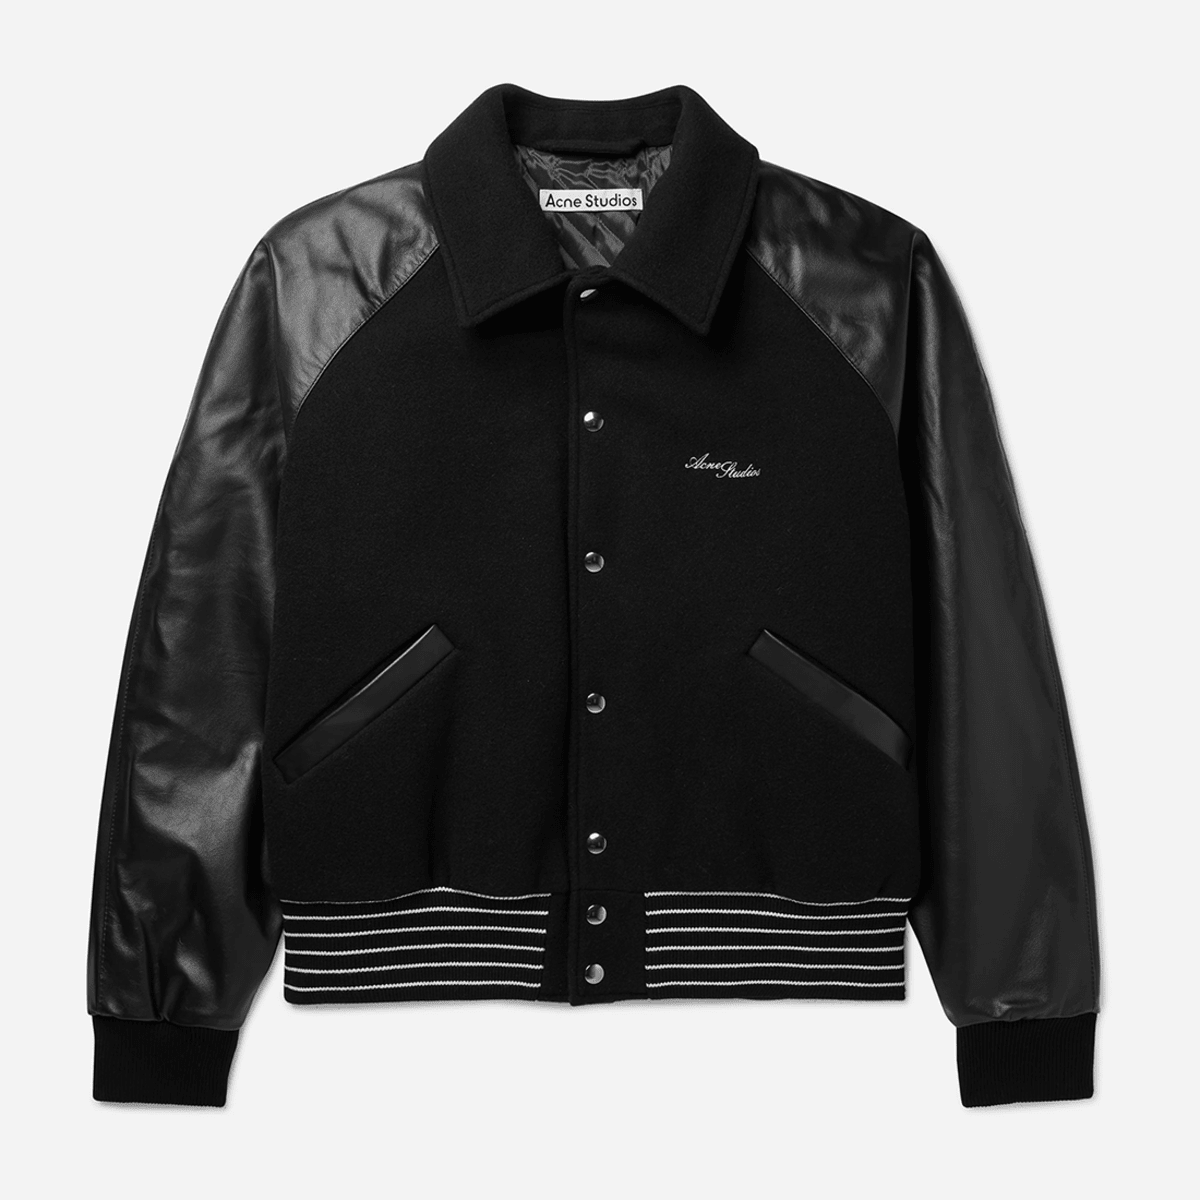 Acne Studios Combines a Bomber and Varsity Jacket With Its Latest